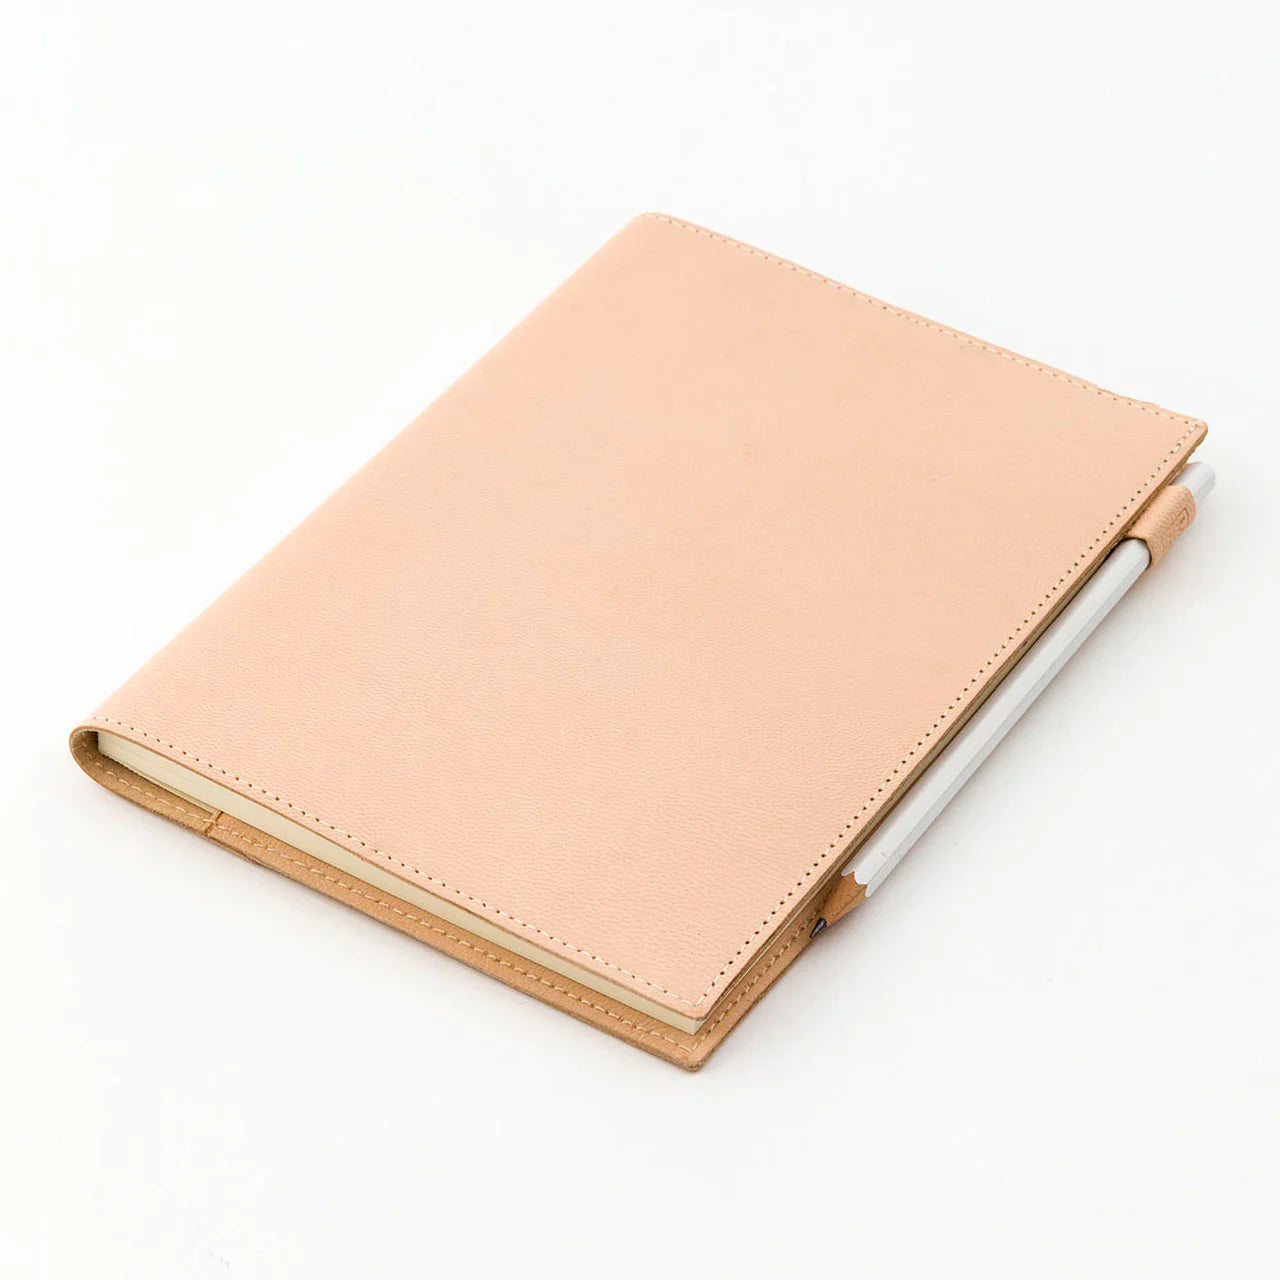 MIDORI A5 GOAT LEATHER NOTEBOOK COVER